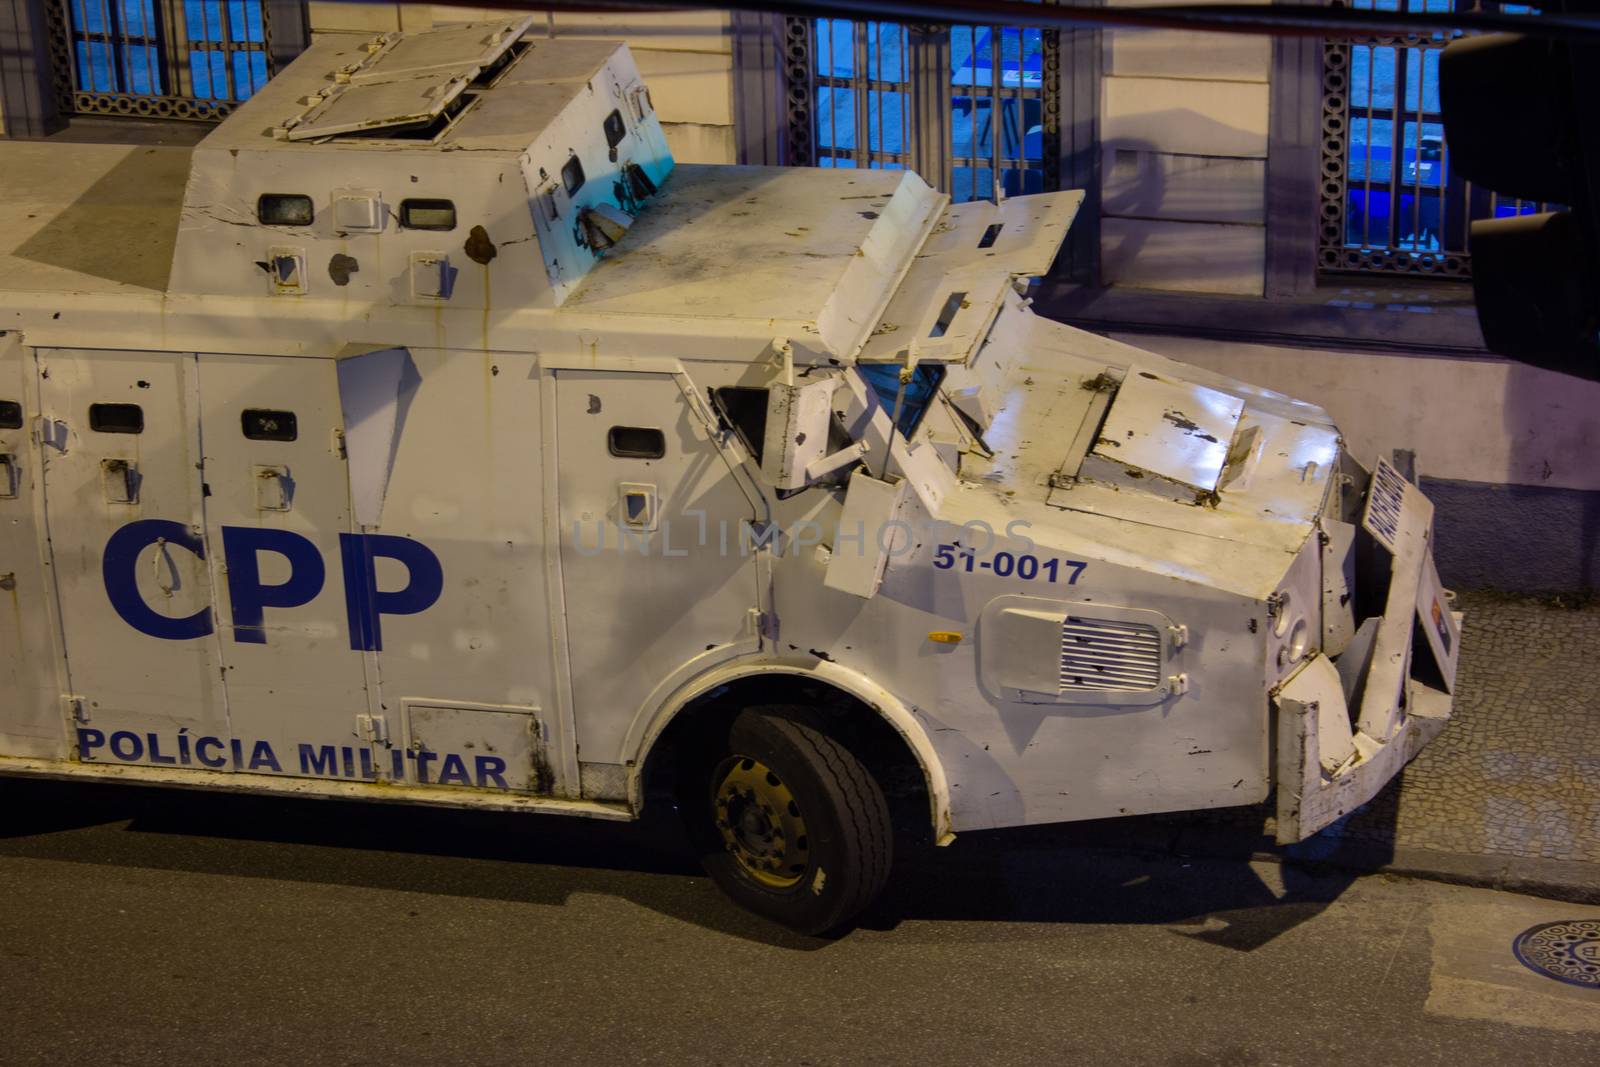 Police armored truck parked in front of a police station by etcho